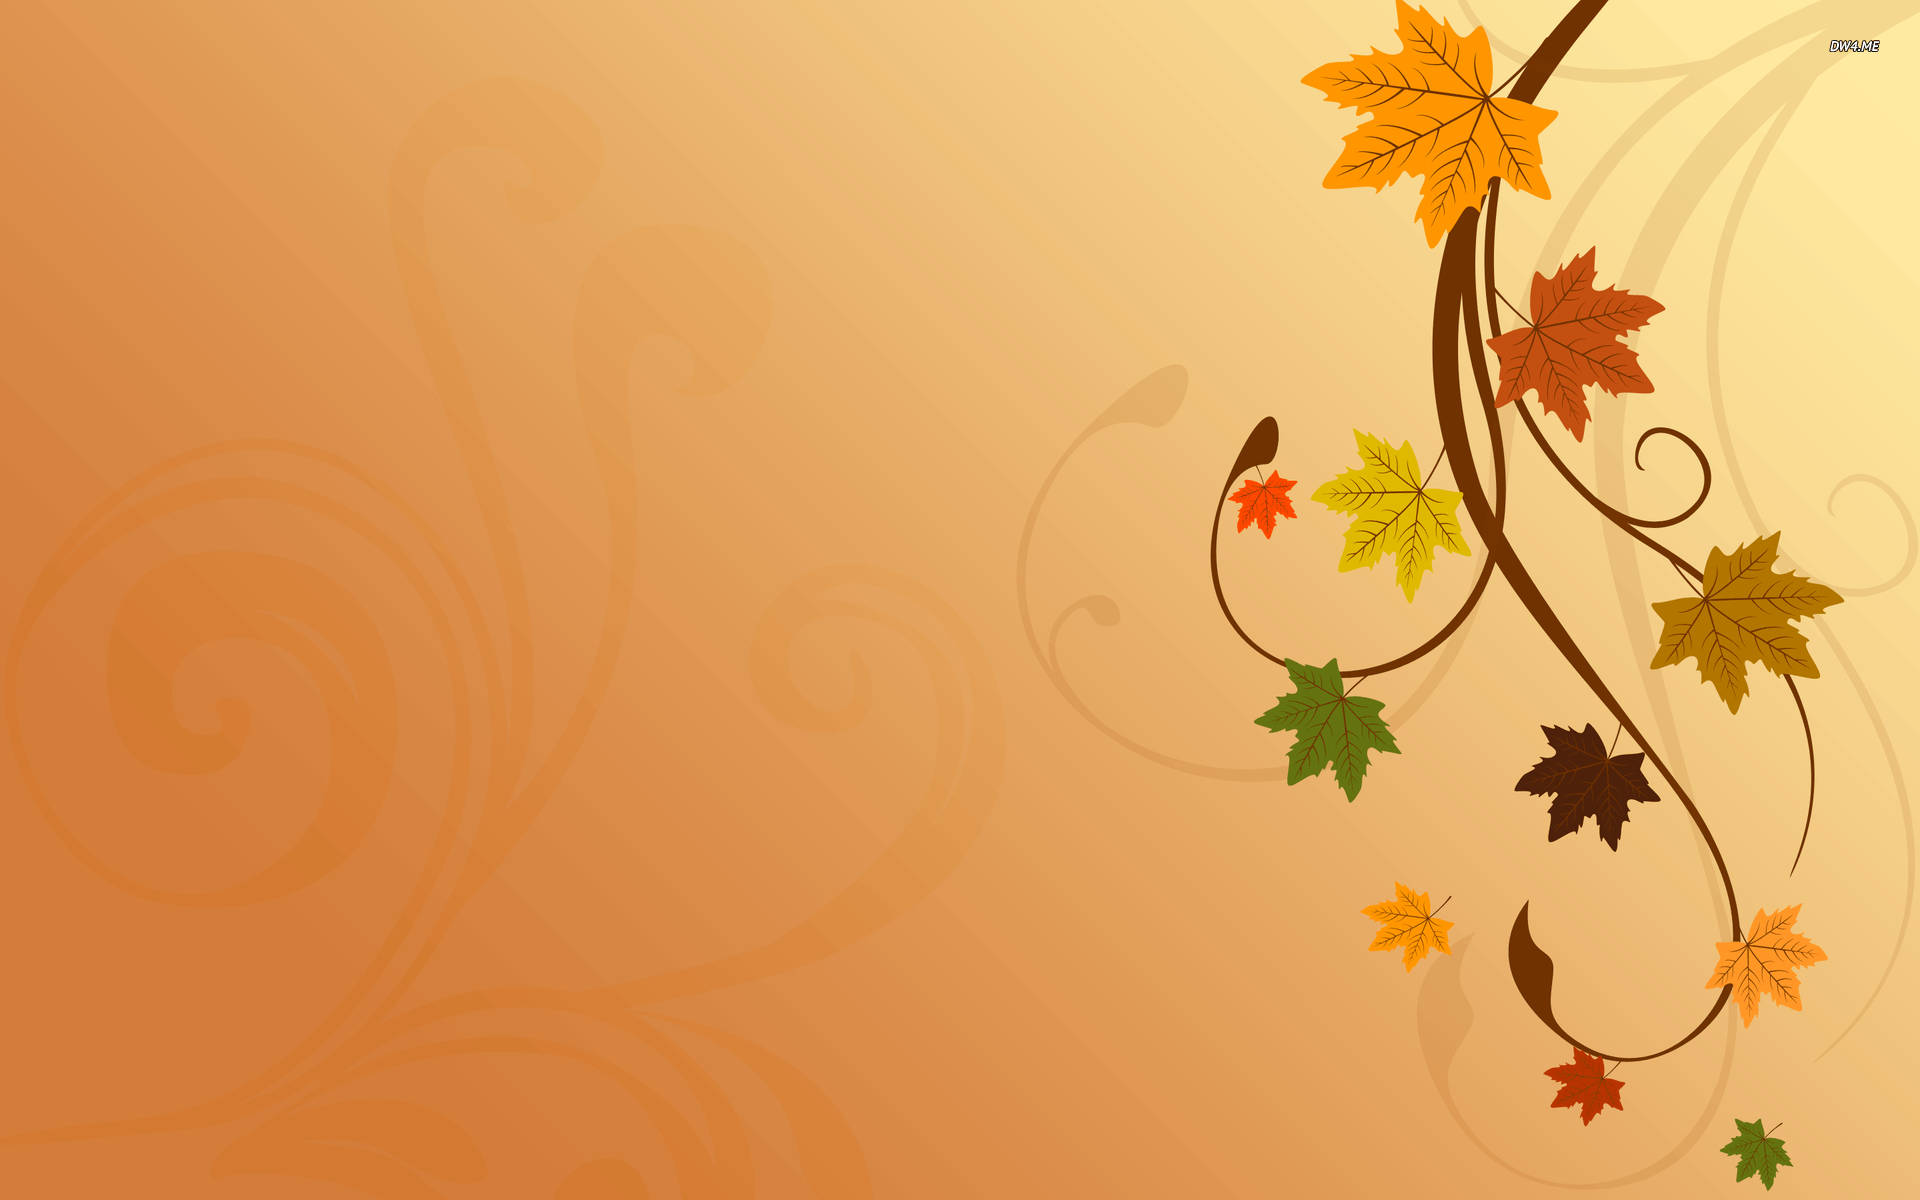 Celebrate Thanksgiving this year with a pattern of colorful maple leaves. Wallpaper